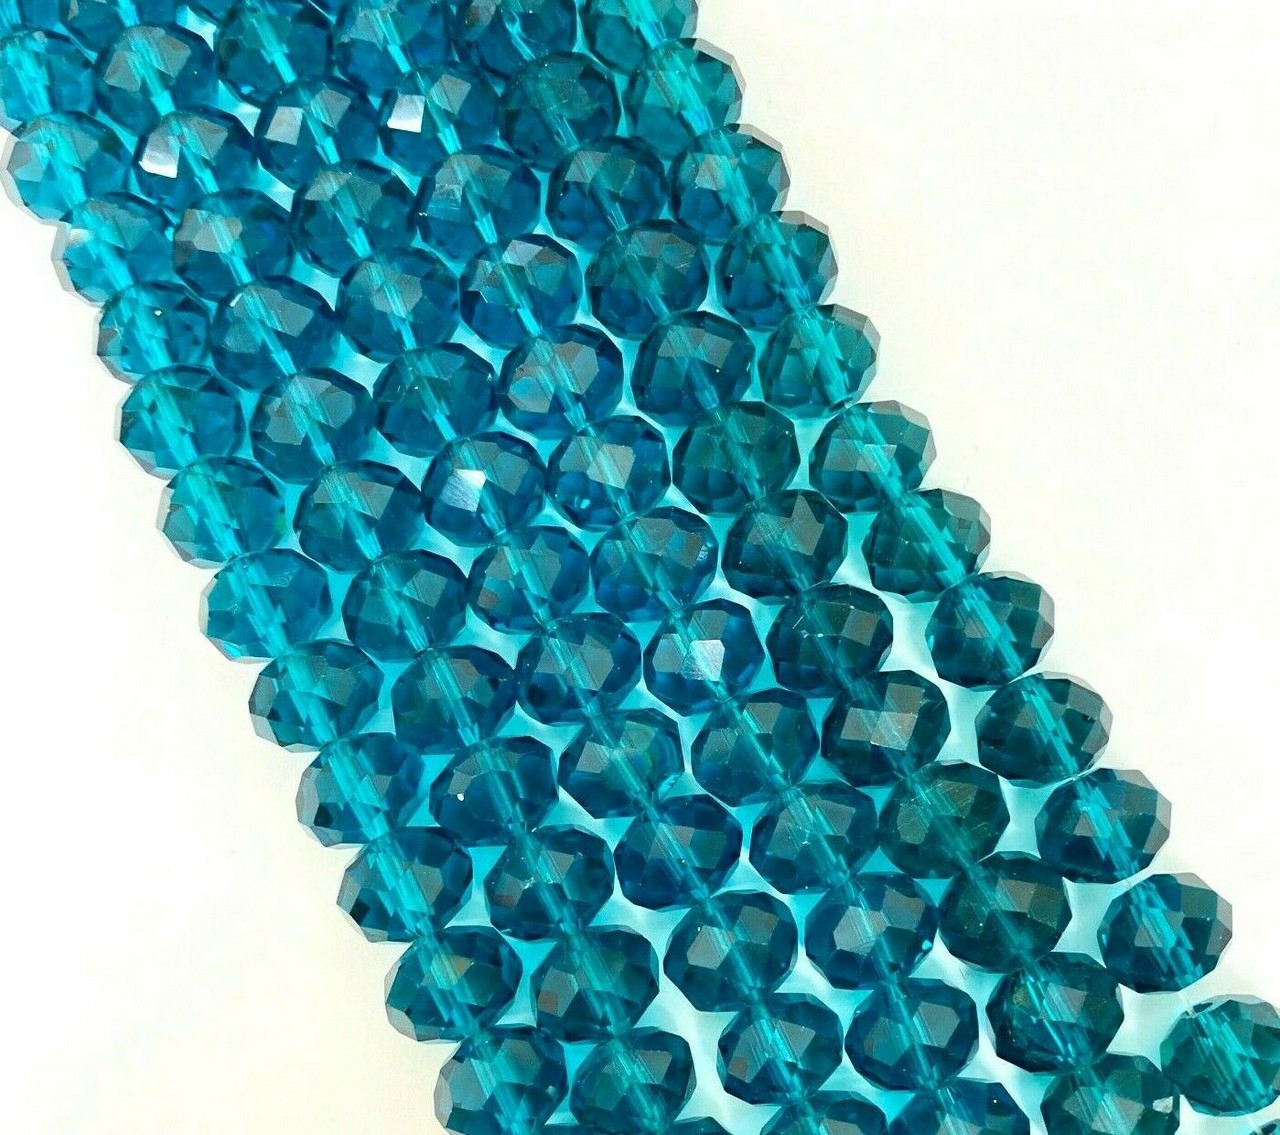 8x6mm Faceted Glass Rondelles - DARK TURQUOISE - approx 72 beads / 17 inch strand